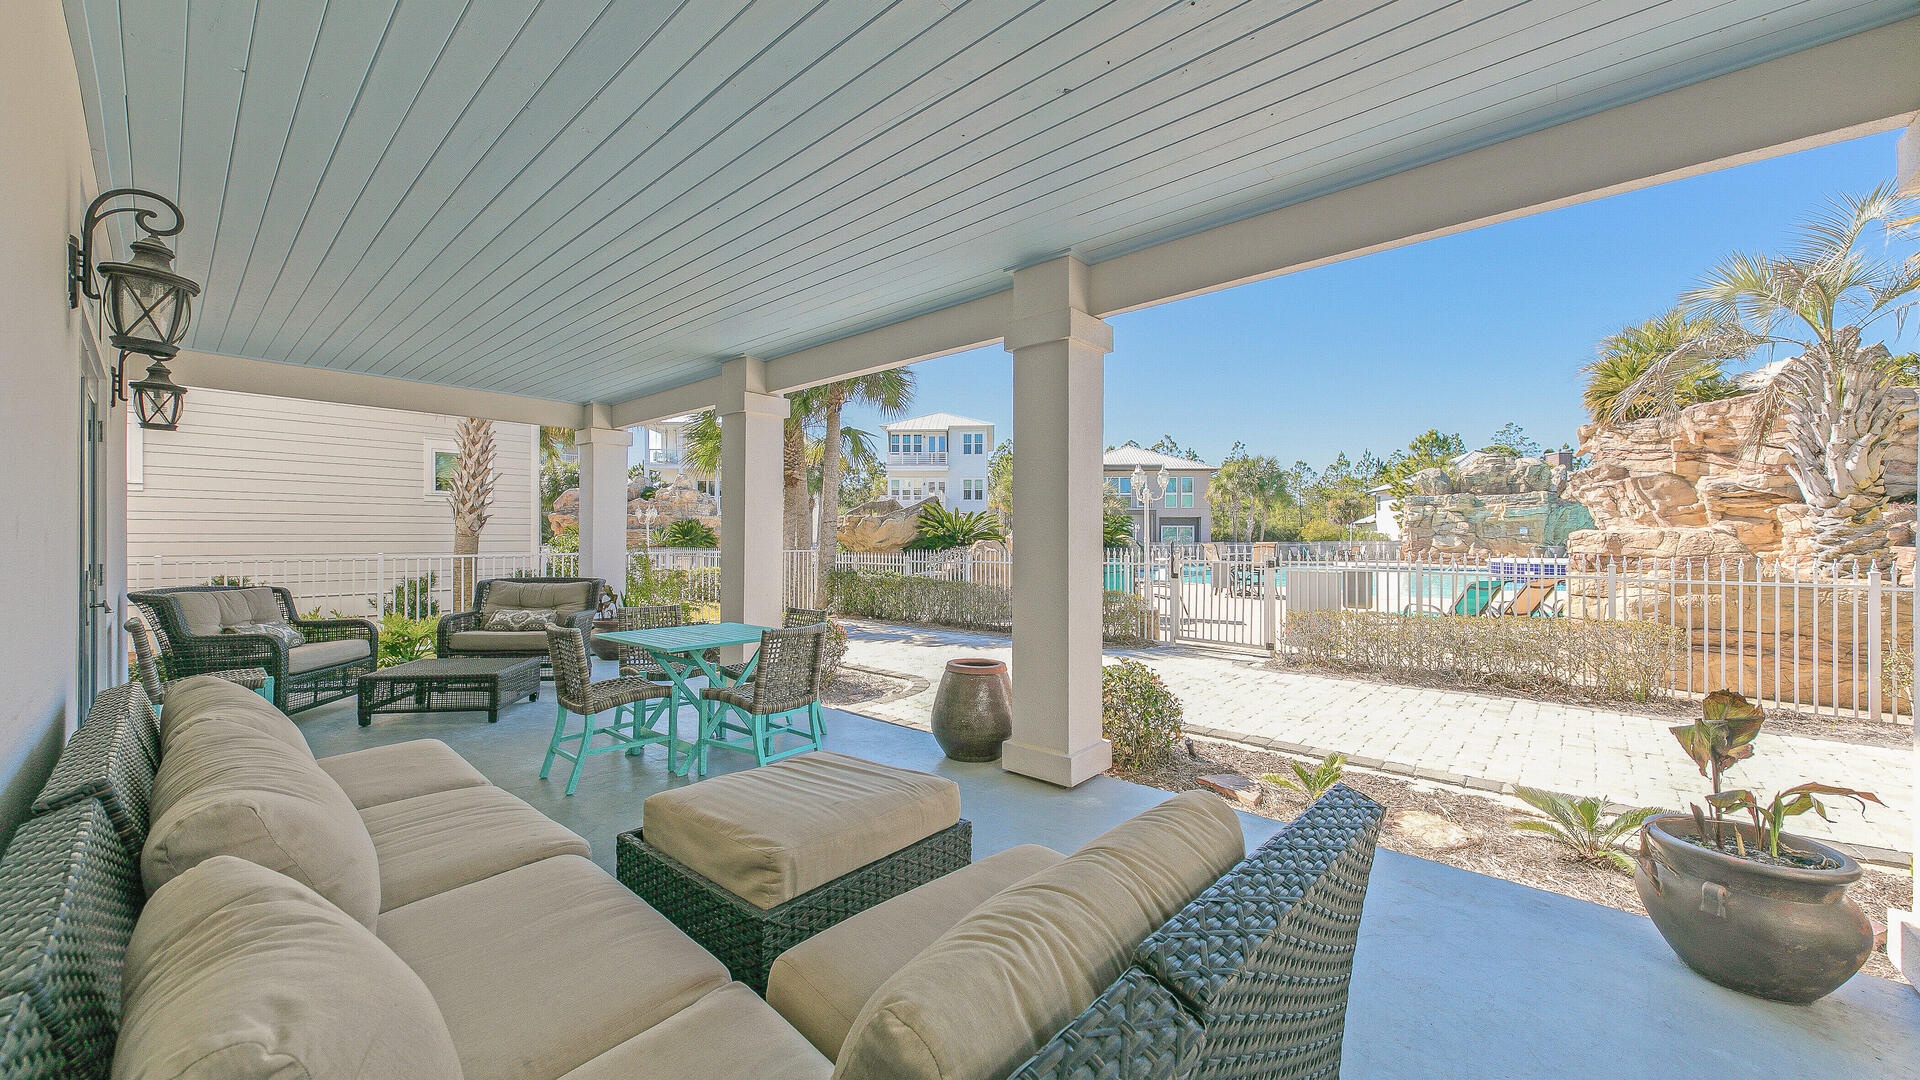 Relax in the shade on the pool patio with private access to the pool!